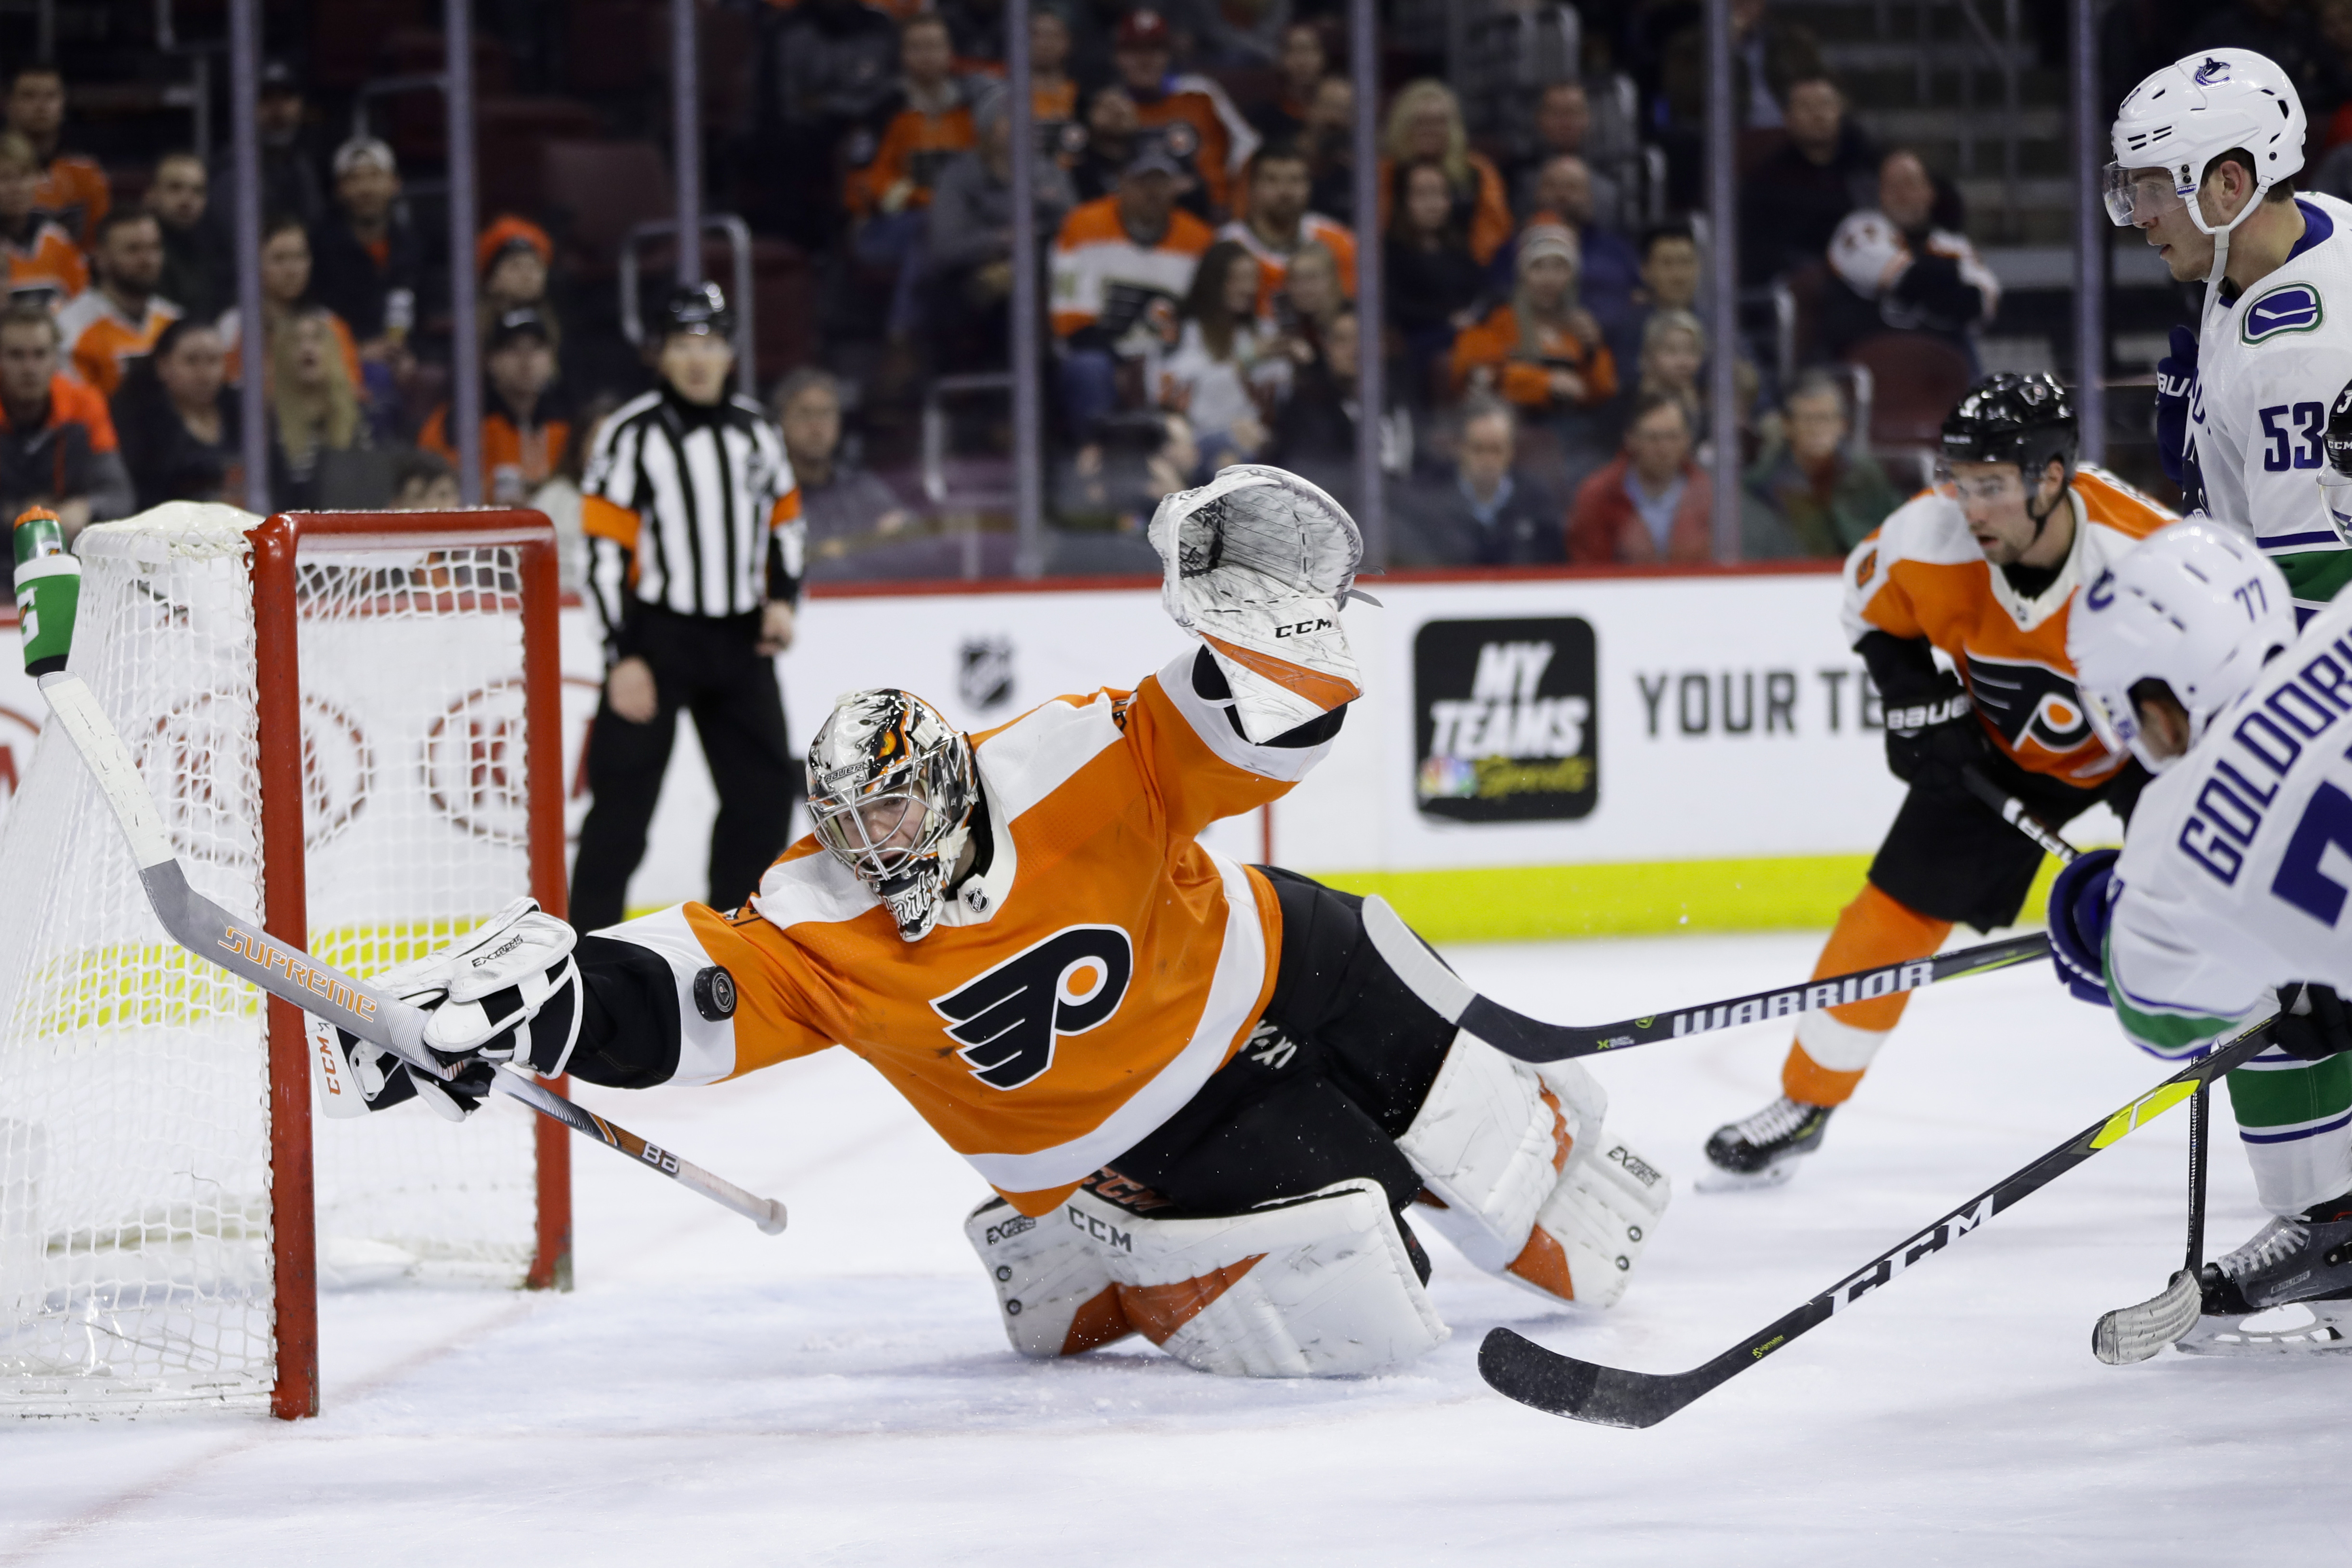 Flyers beat Canucks 2-1, notch 8th straight victory